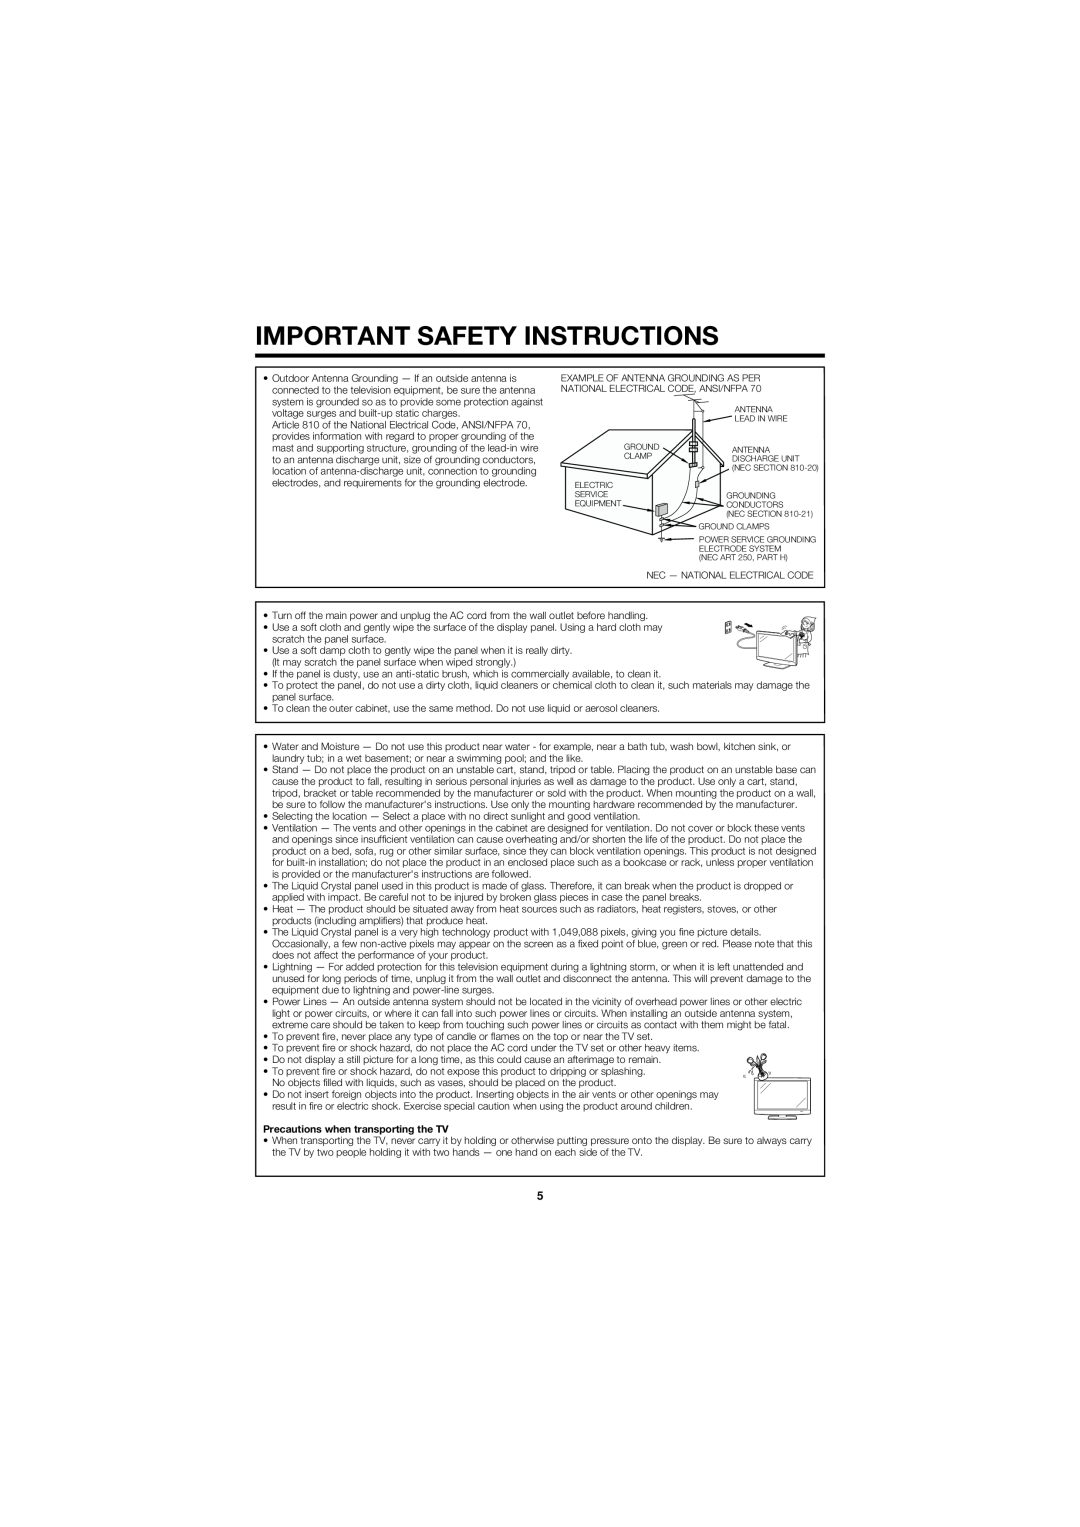 Sharp LC32D47UT operation manual Precautions when transporting the TV, Important Safety Instructions 